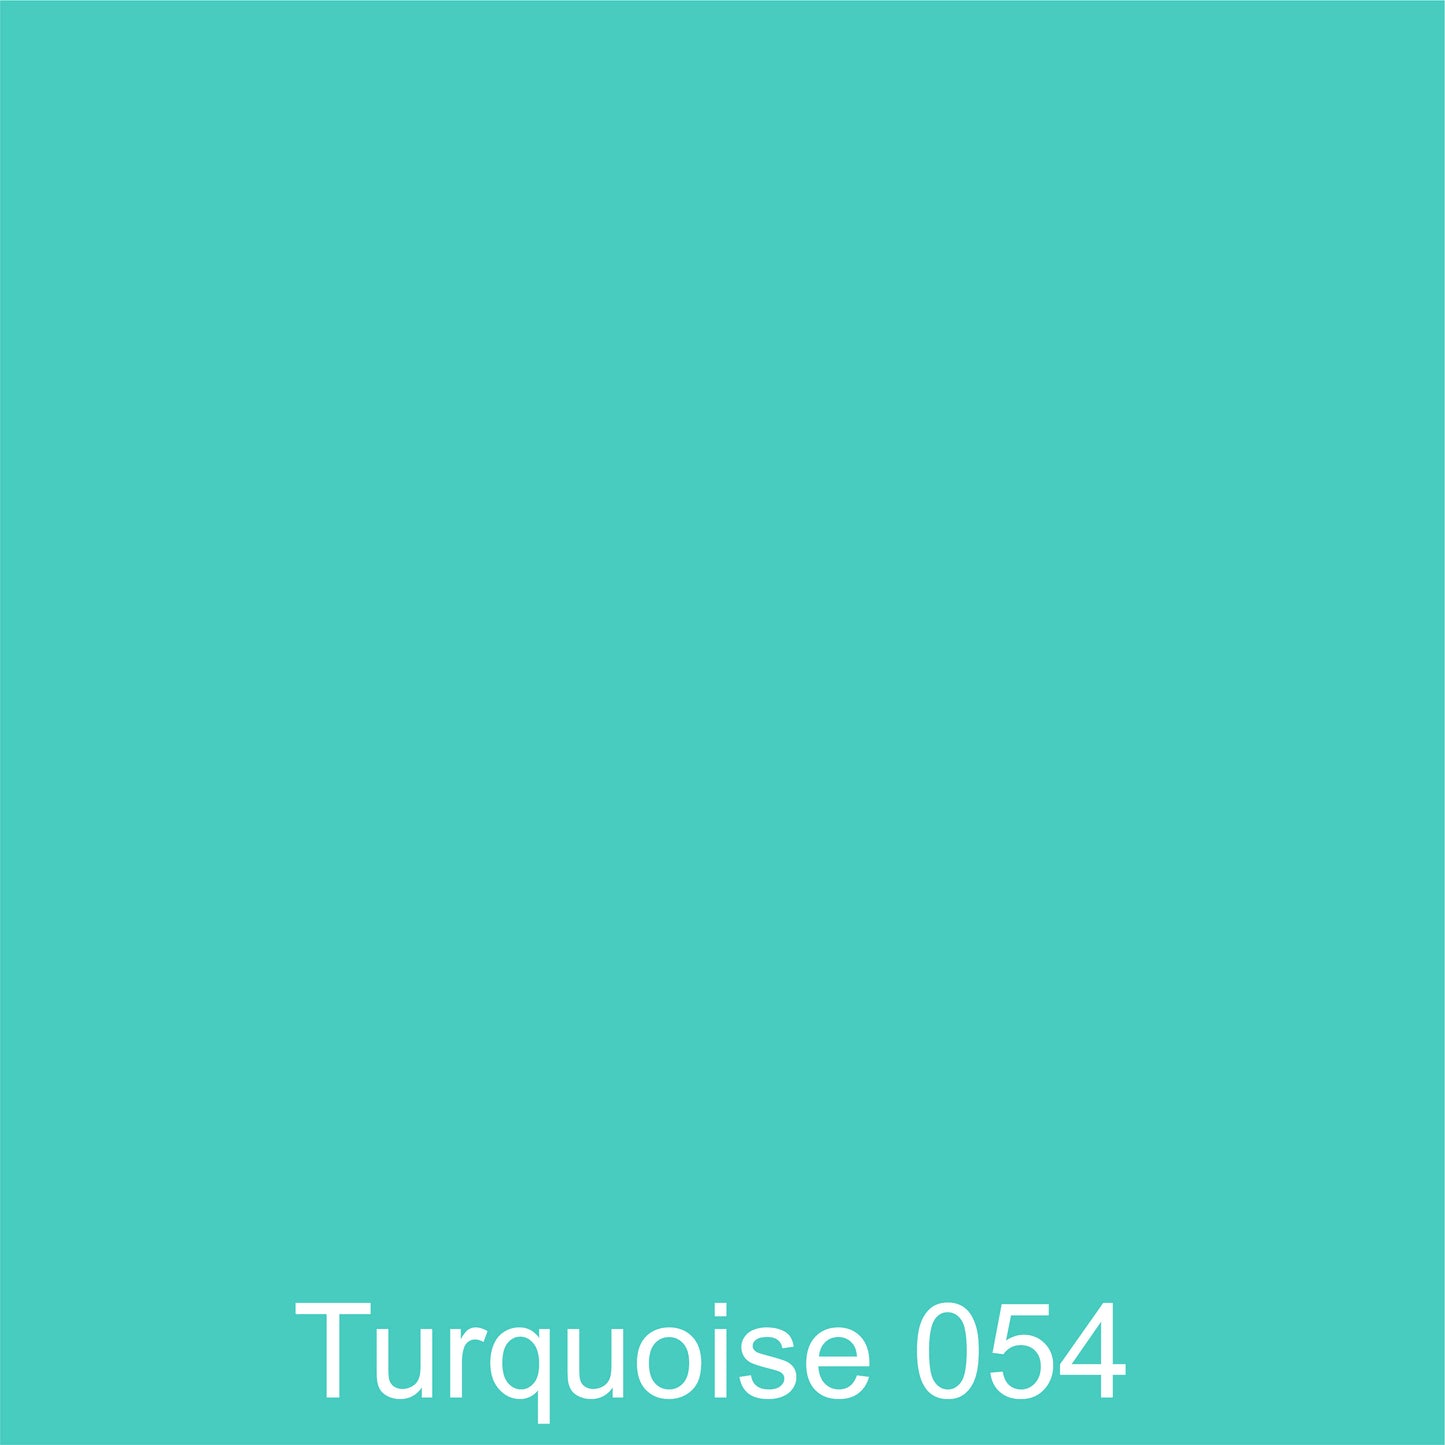 Oracal 651 Gloss :- Turquoise - 054